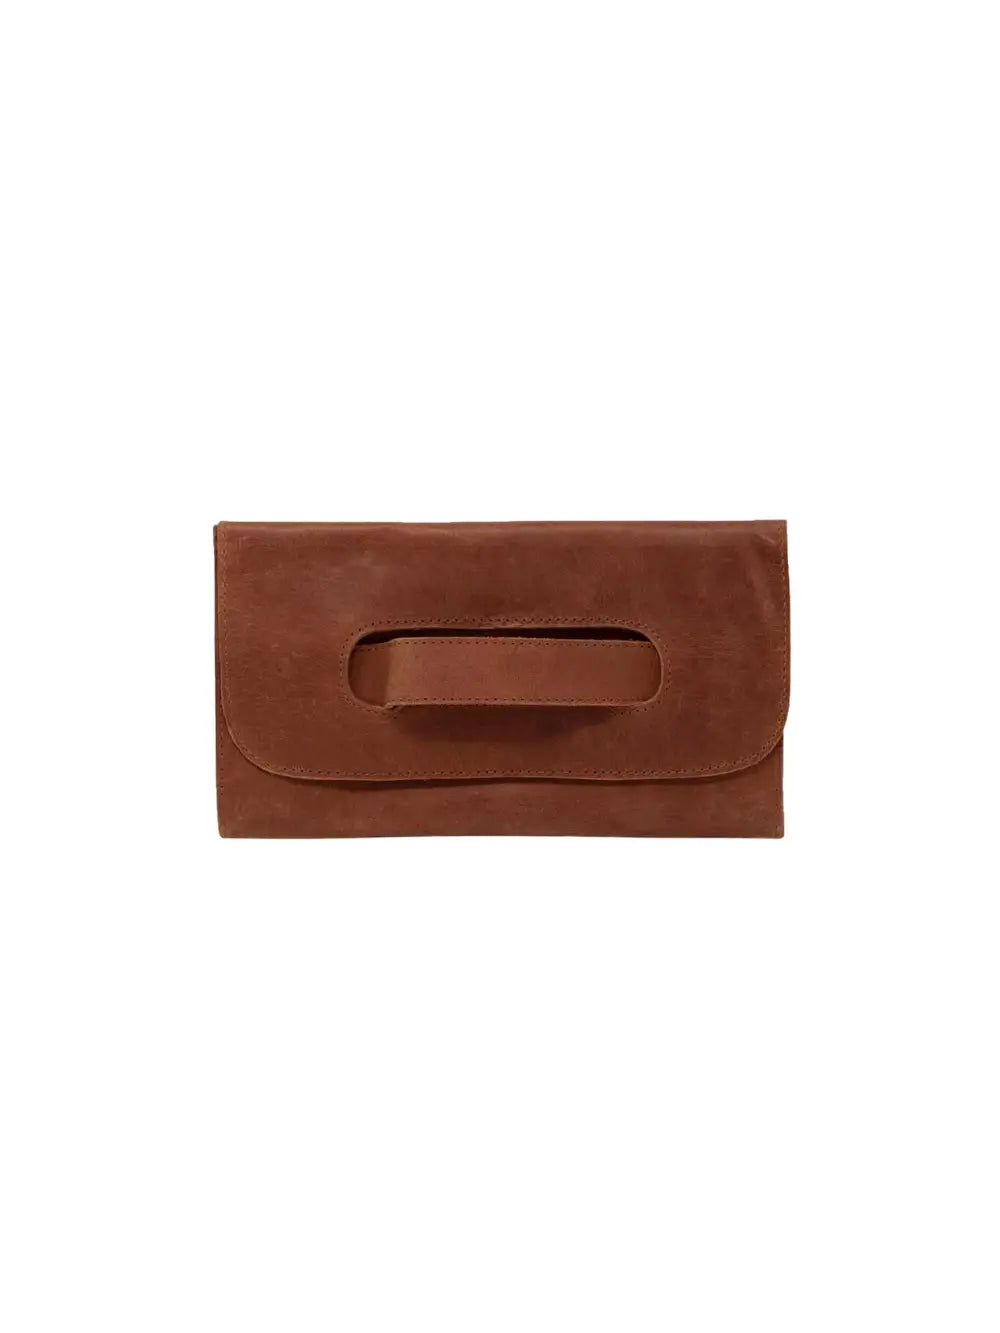 ABLE mare handle clutch in whiskey leather